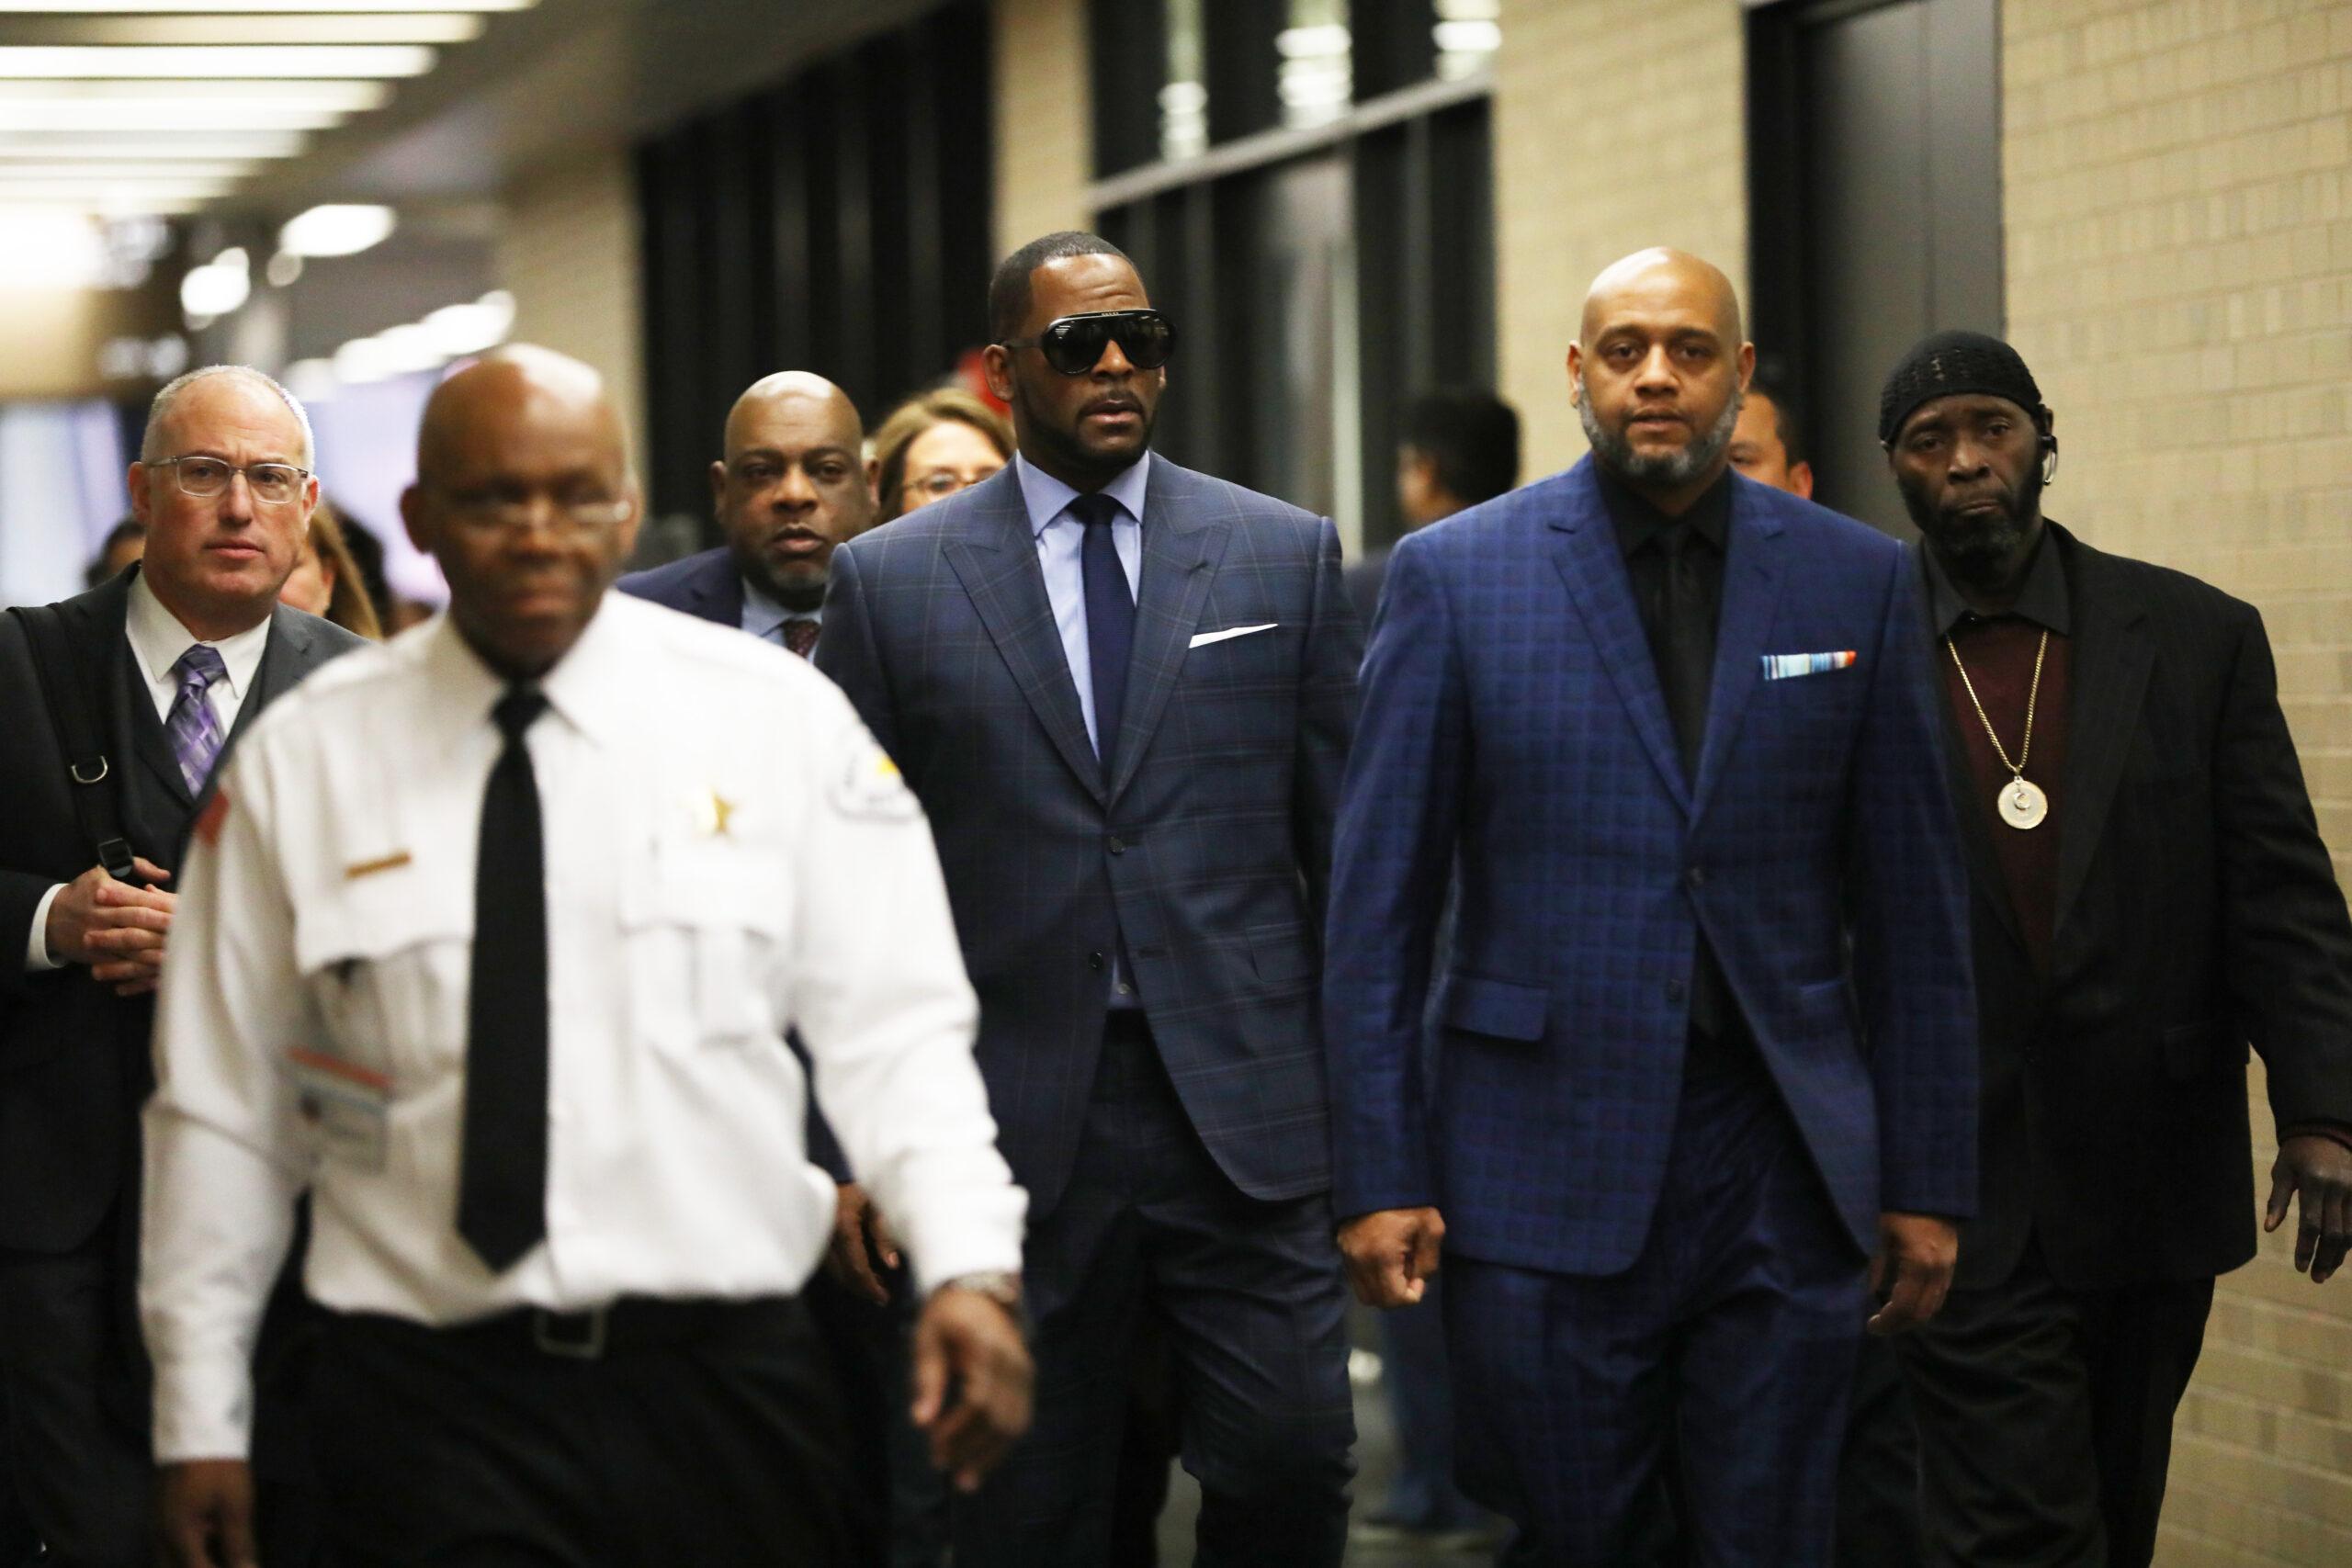 R. Kelly Request Herpes-Related Charges Dropped From Criminal Case